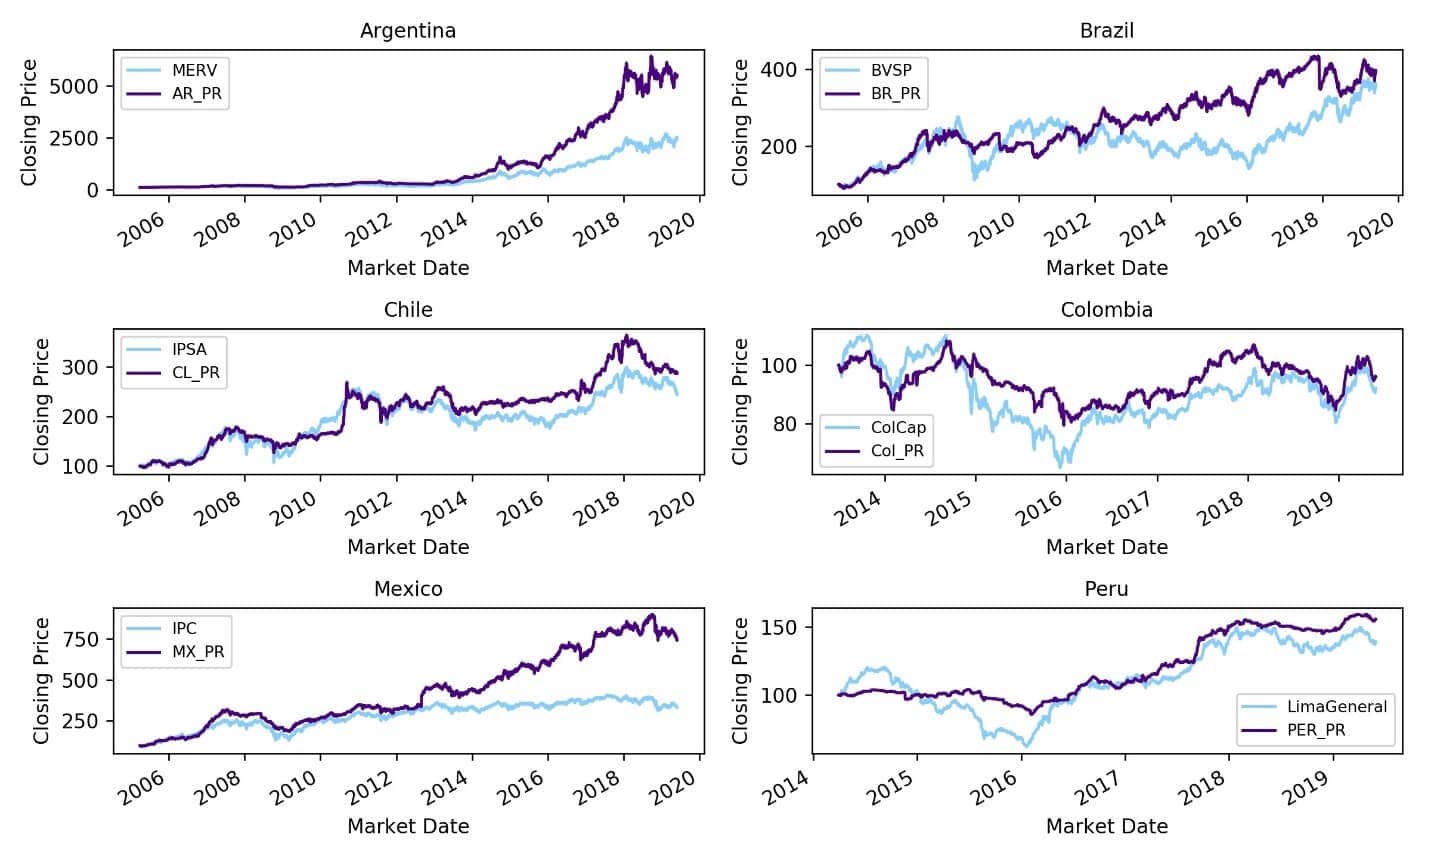 Low-Volatility-Price-Return-Indices-and-Their-Benchmarks-in-LatAm